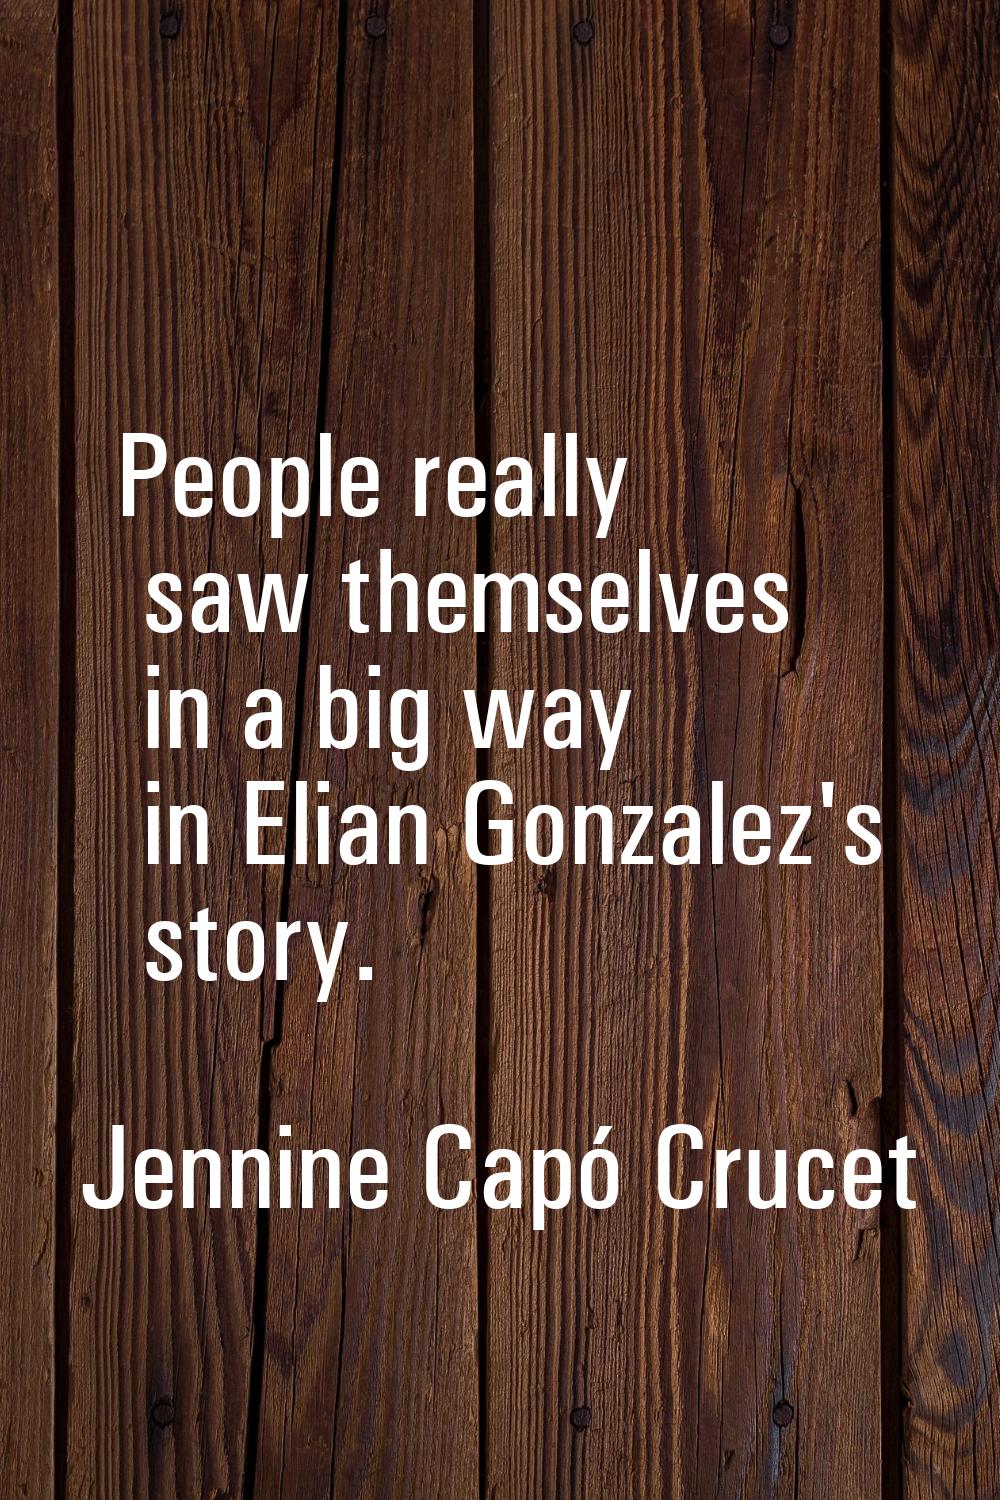 People really saw themselves in a big way in Elian Gonzalez's story.